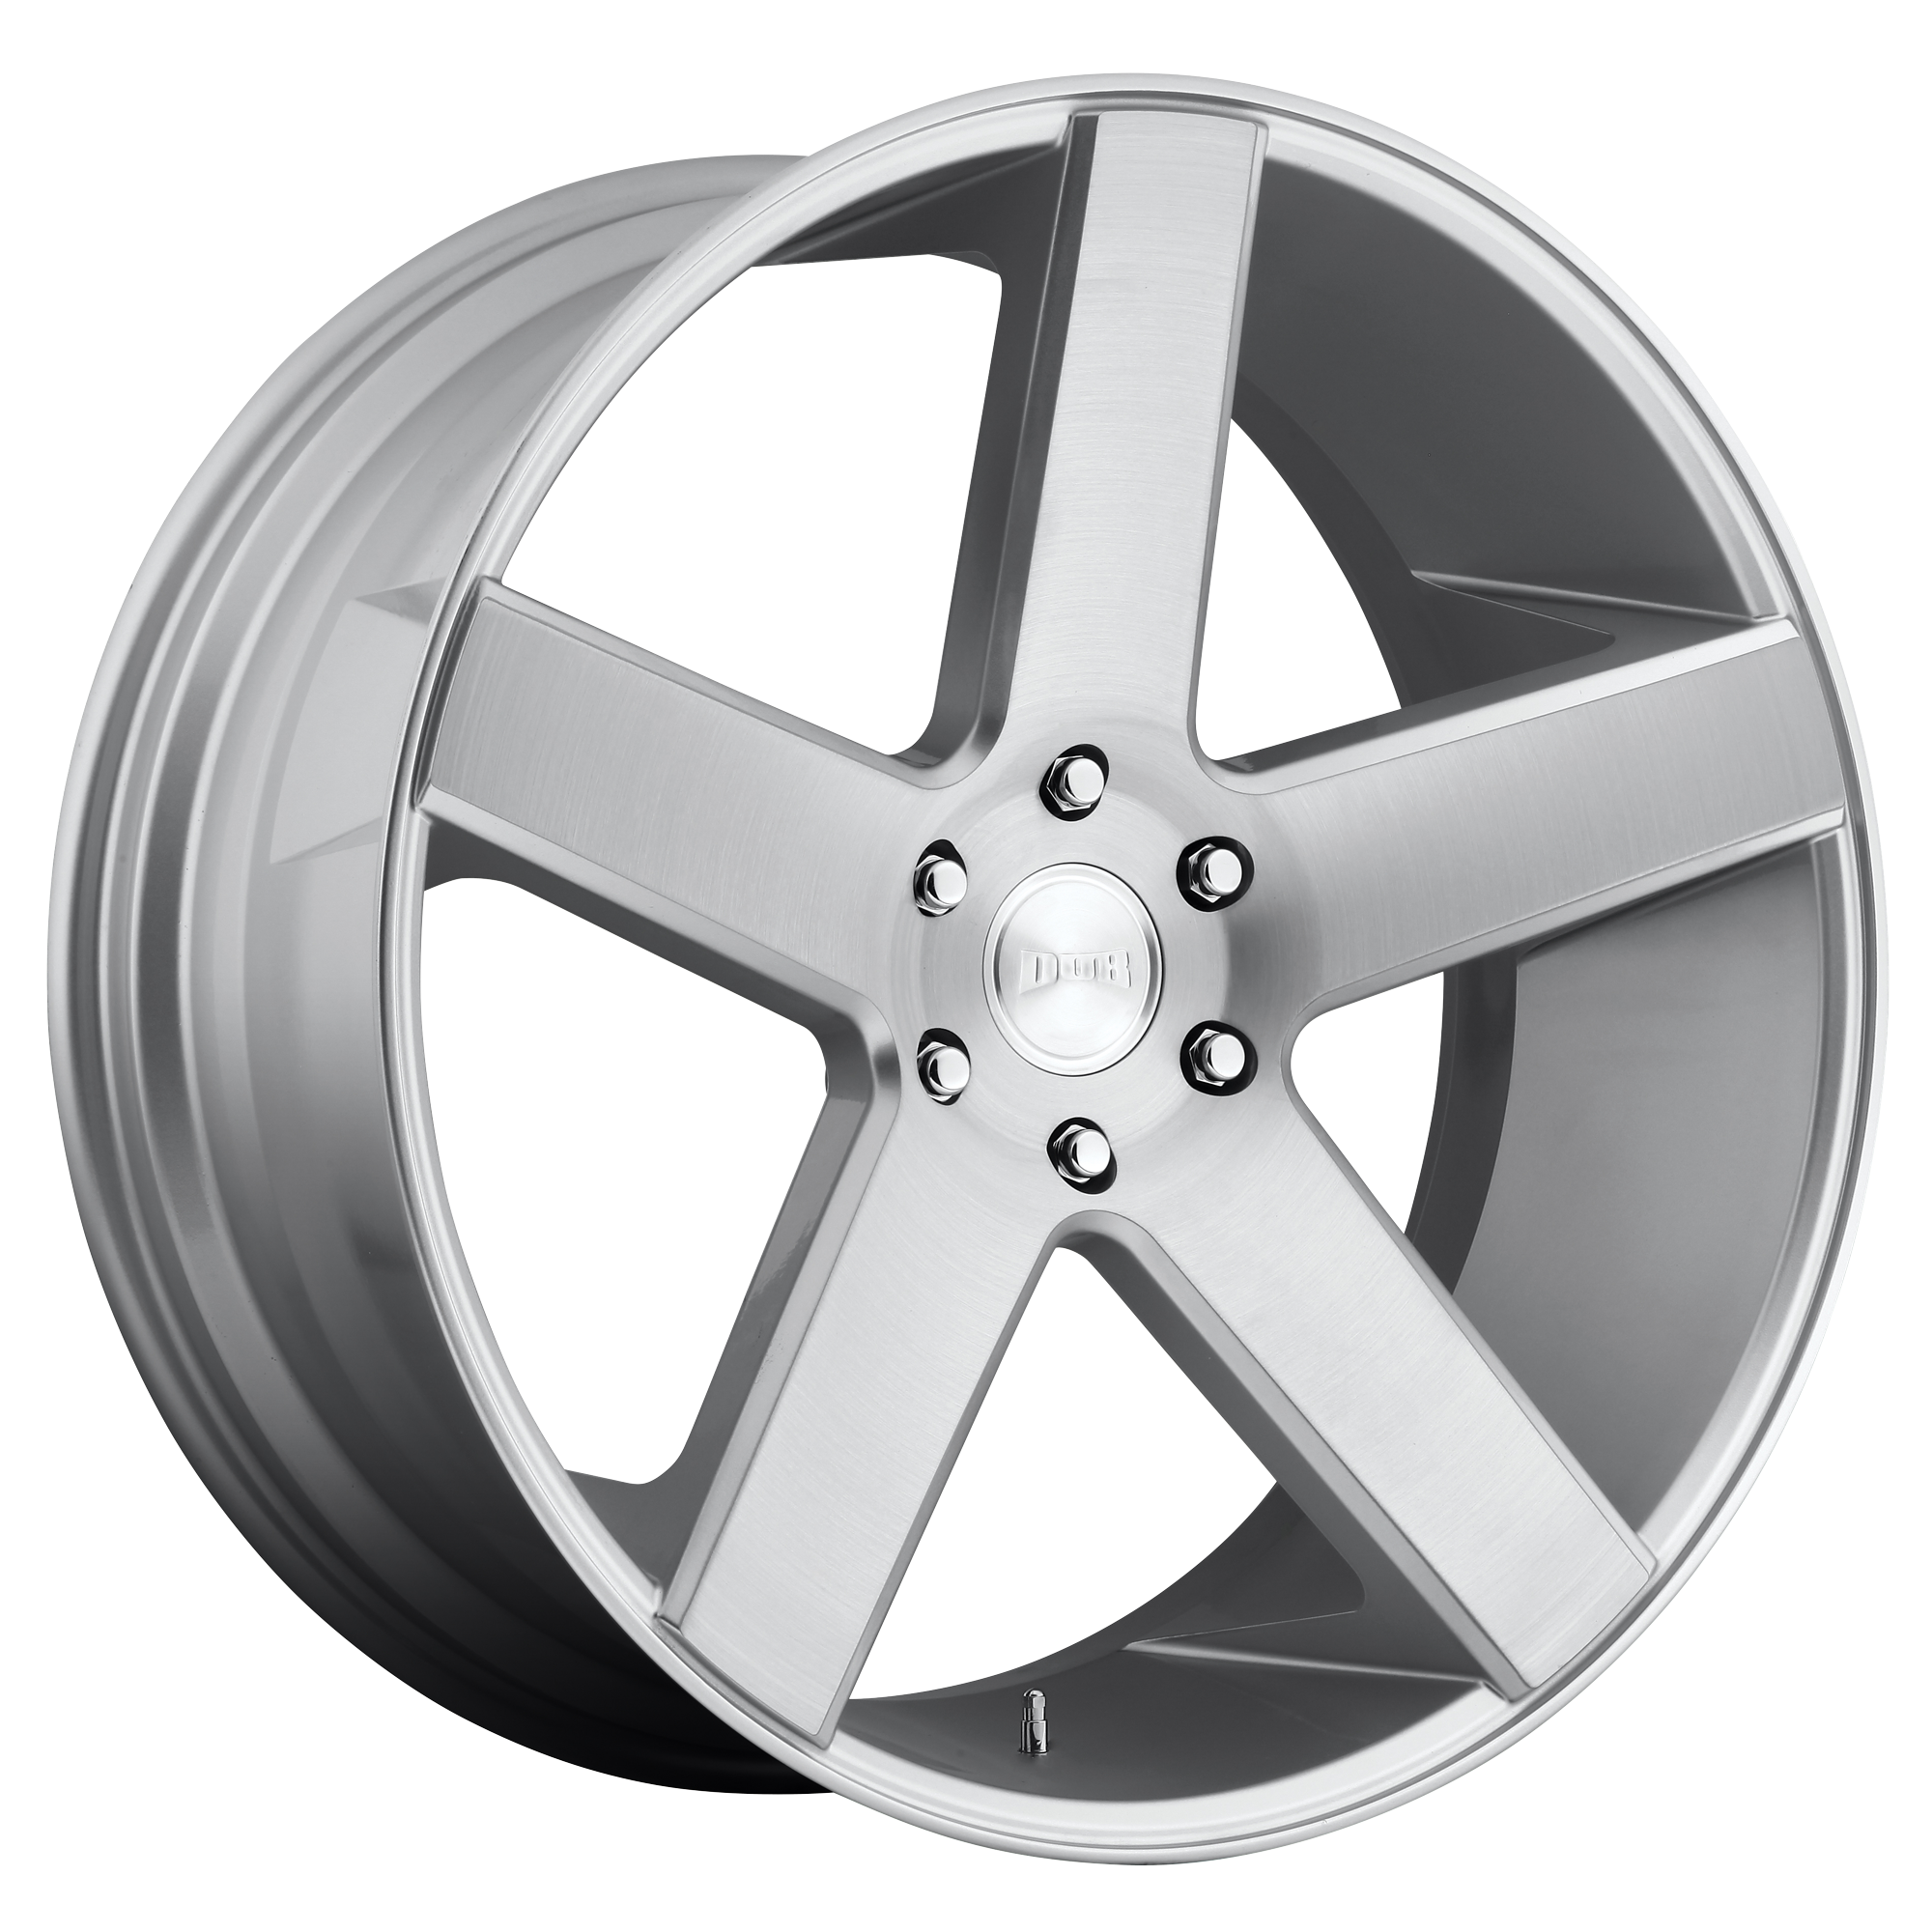 BALLER 22x9.5 5x127.00 GLOSS SILVER BRUSHED (11 mm) - Tires and Engine Performance